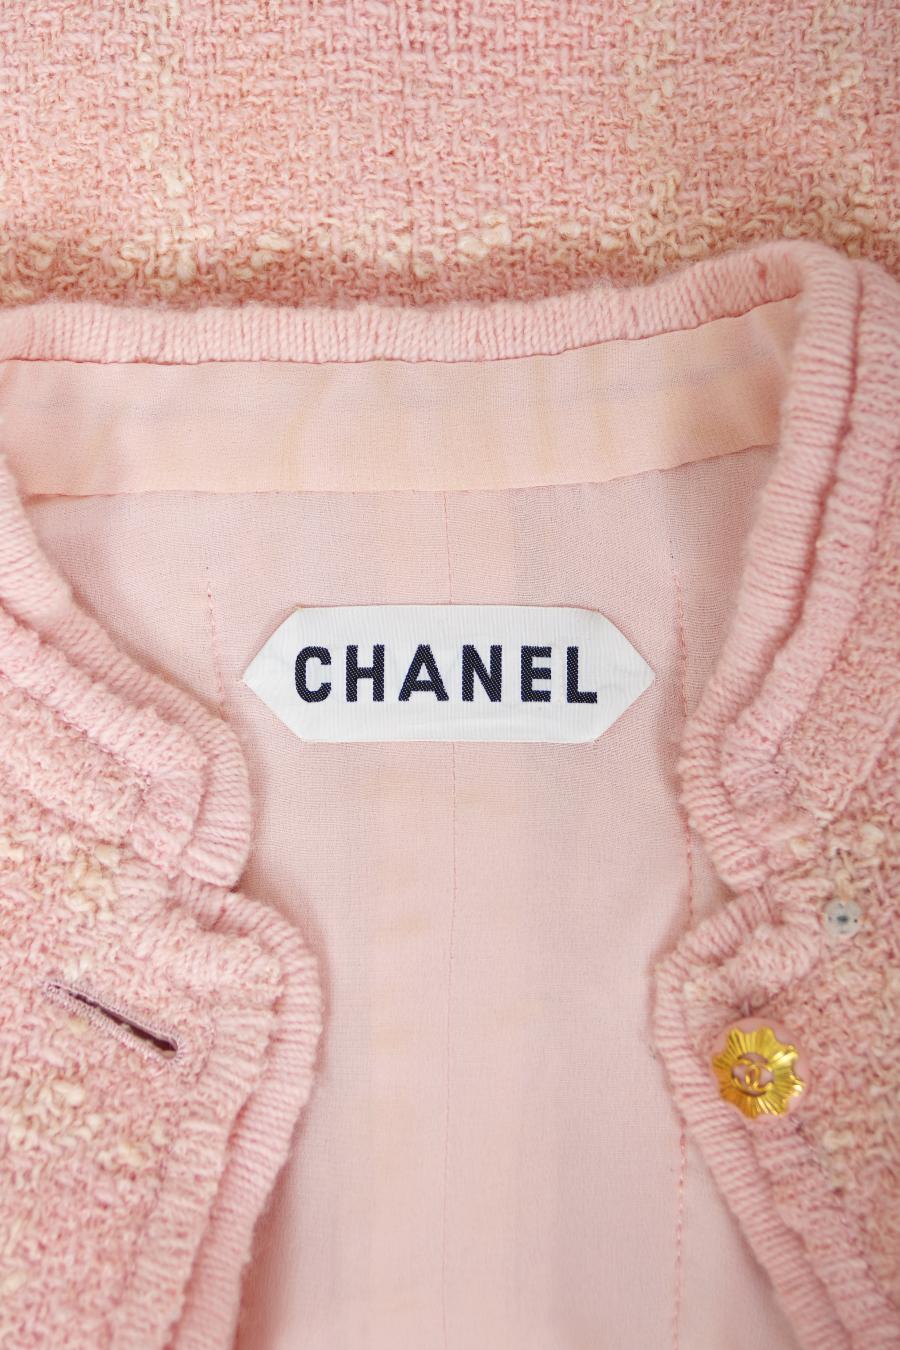 Vintage 1973 Chanel Haute Couture Documented Pink Wool Jacket Blouse Skirt Suit For Sale 15